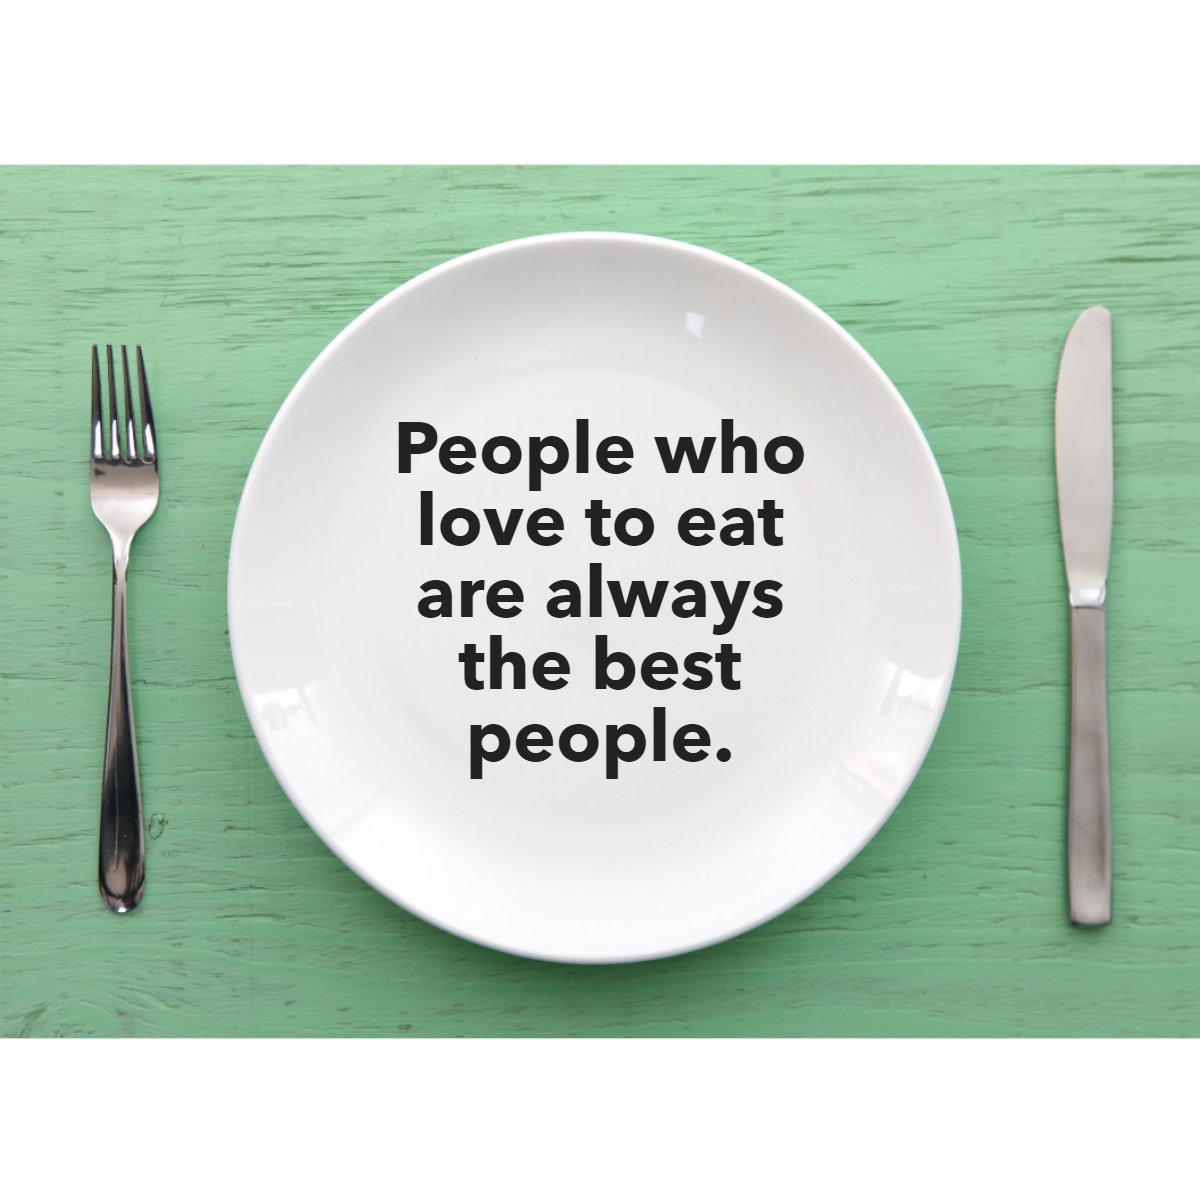 'People who love to eat are always the best people.'  
— Julia Child 😊

#goodfood #goodpeople #goodmoodfood #goodtimeswithgoodpeople #foodisgood #goodtimeswithgreatpeople #goodfoodgoodlife
 #homeswithtiffany #homegoals #homeinspiration #design #homes #realestate